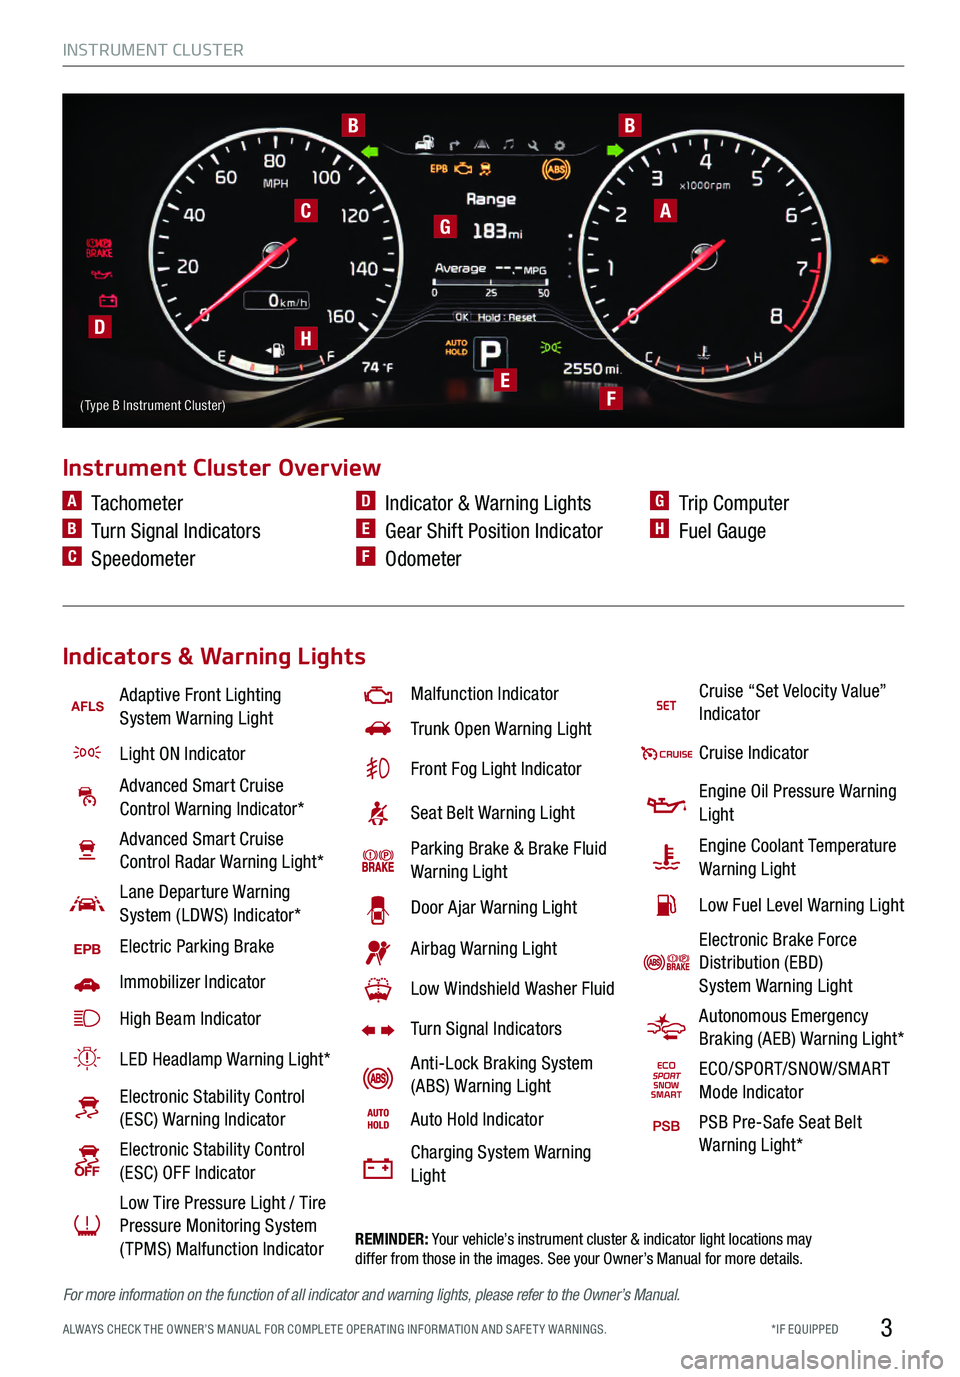 KIA K900 2017  Features and Functions Guide 3
www.KuTechVideos.com/kh13/2017
AFLSAdaptive Front Lighting System Warning Light
Light ON Indicator 
Advanced Smart Cruise Control Warning Indicator*
Advanced Smart Cruise 
Control Radar Warning Ligh